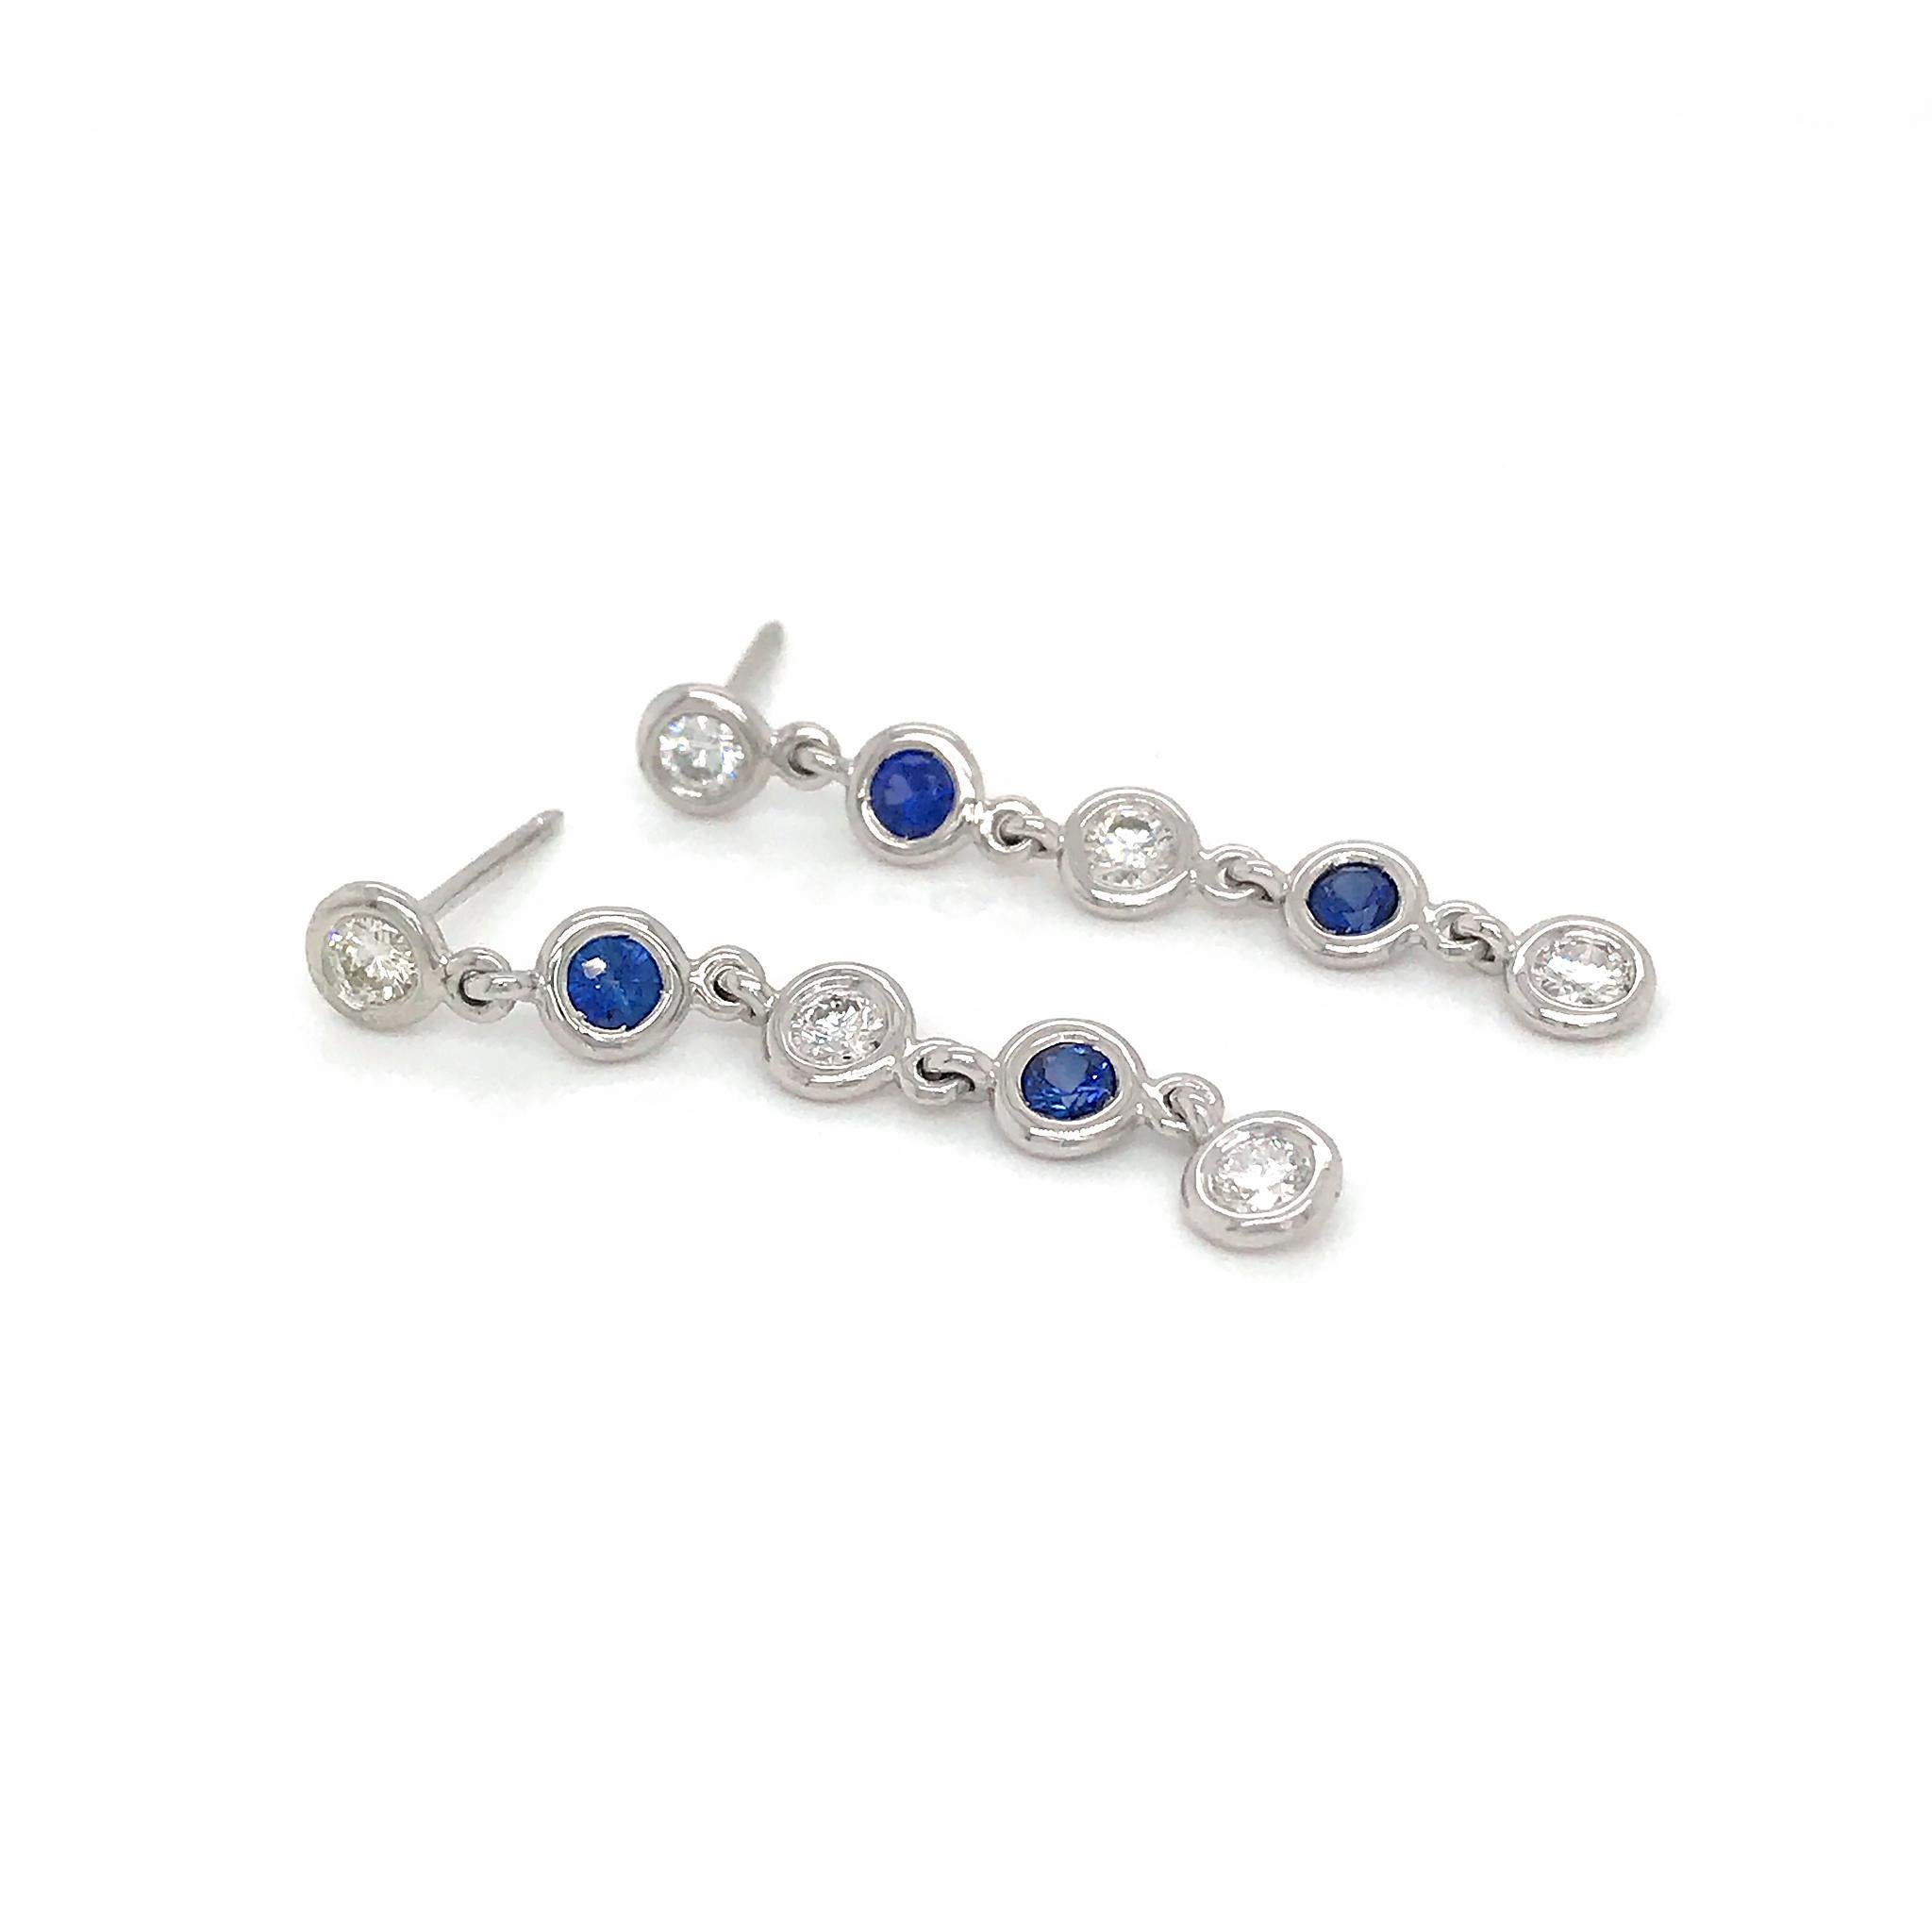 14k White Gold
STONE WEIGHT: 
Diamond = 0.65ct twd
Sapphire = 0.53ct twd
Length: 1.5 inches